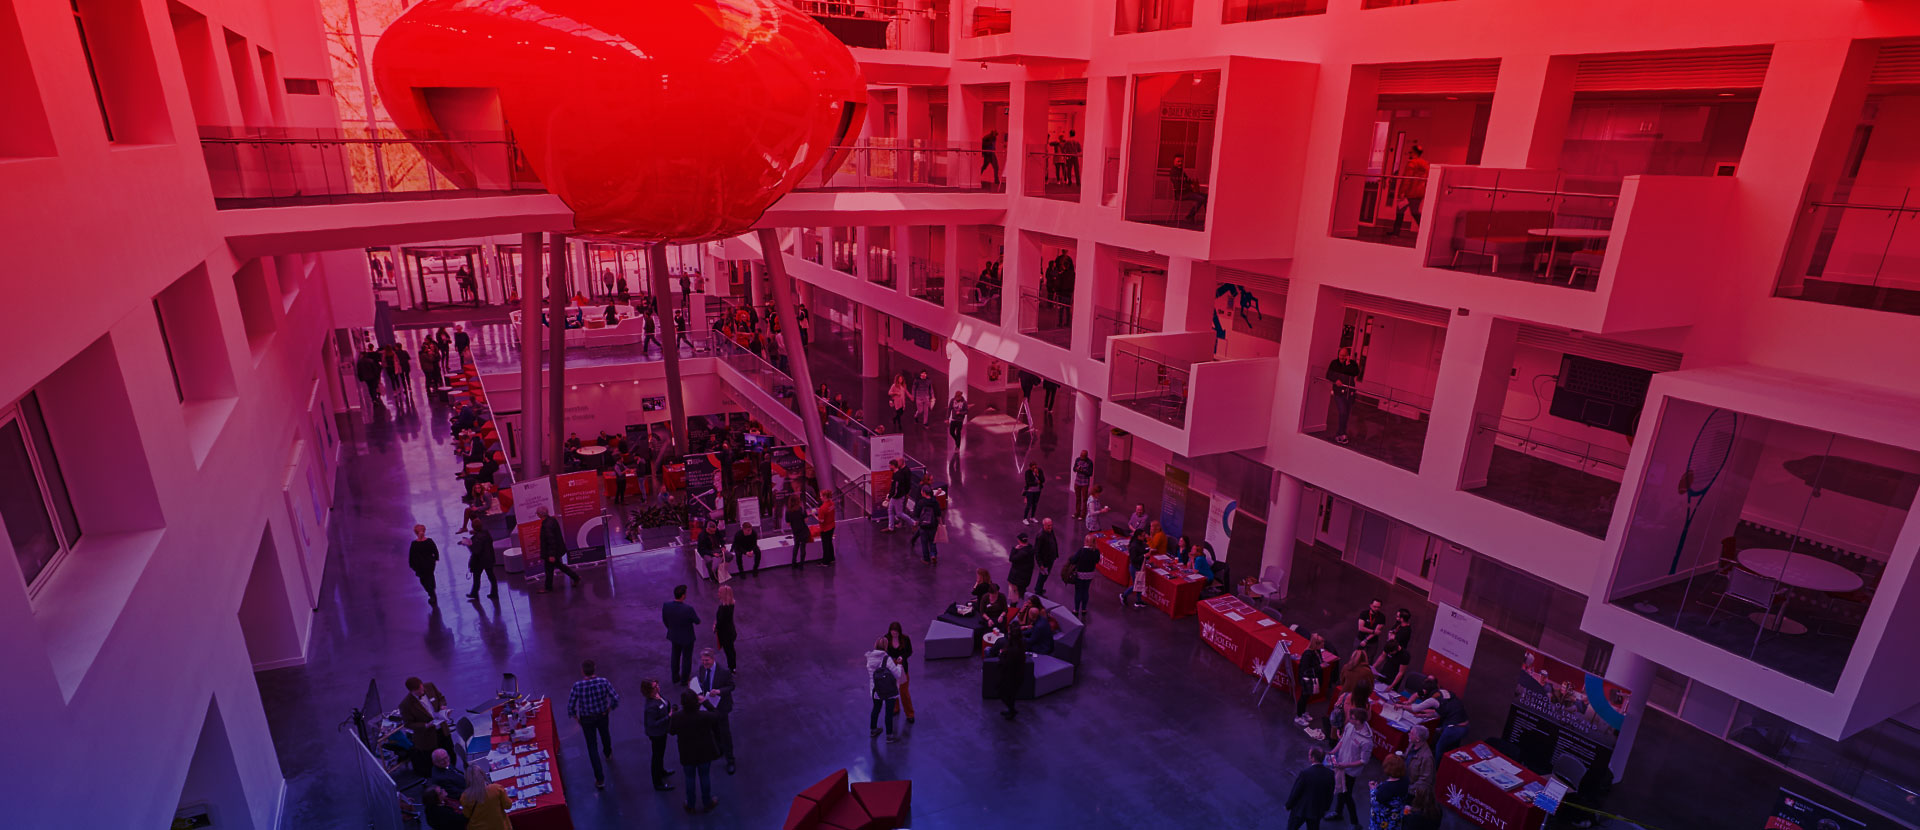 The Spark atrium and The Pod at Solent University